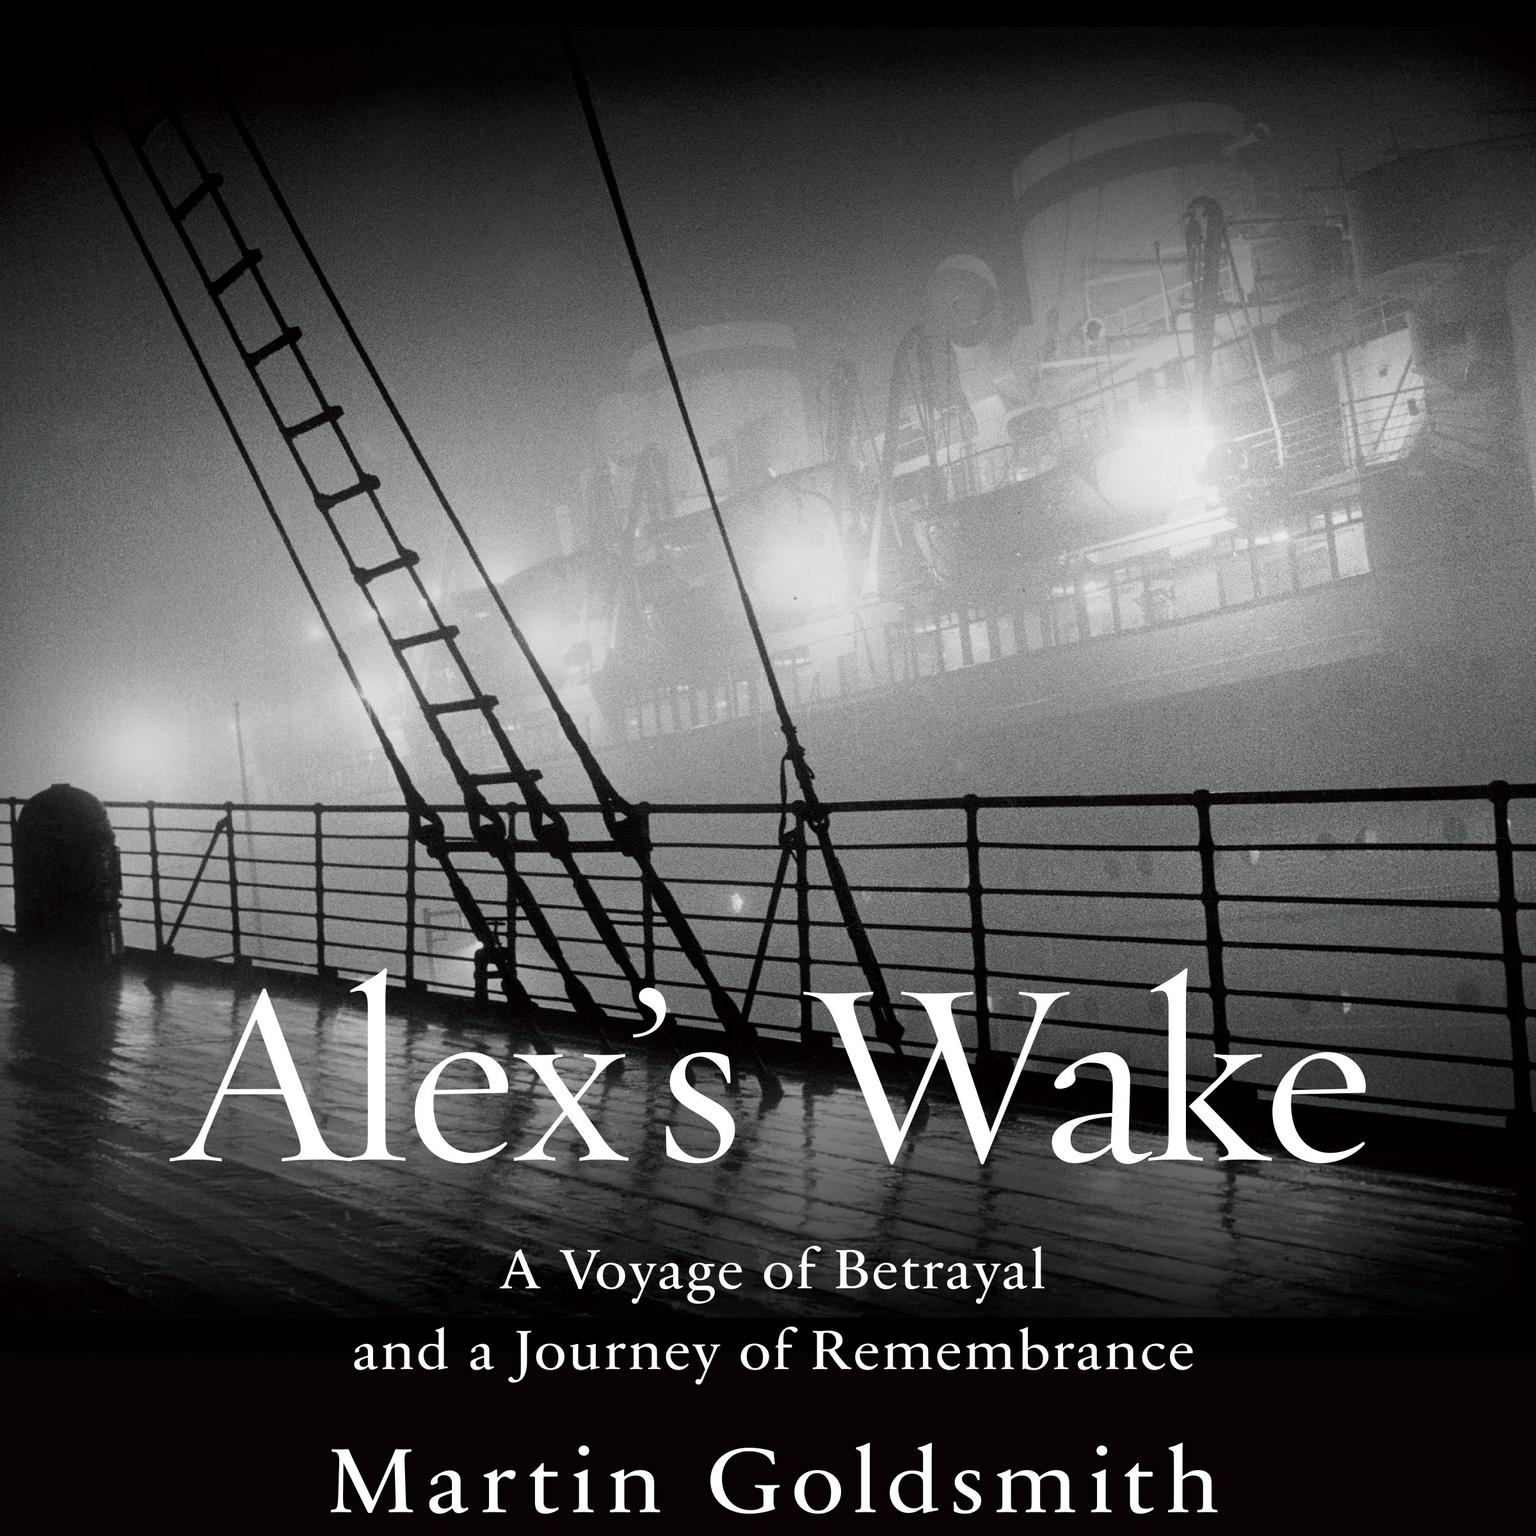 Alexs Wake: A Voyage of Betrayal and Journey of Remembrance Audiobook, by Martin Goldsmith